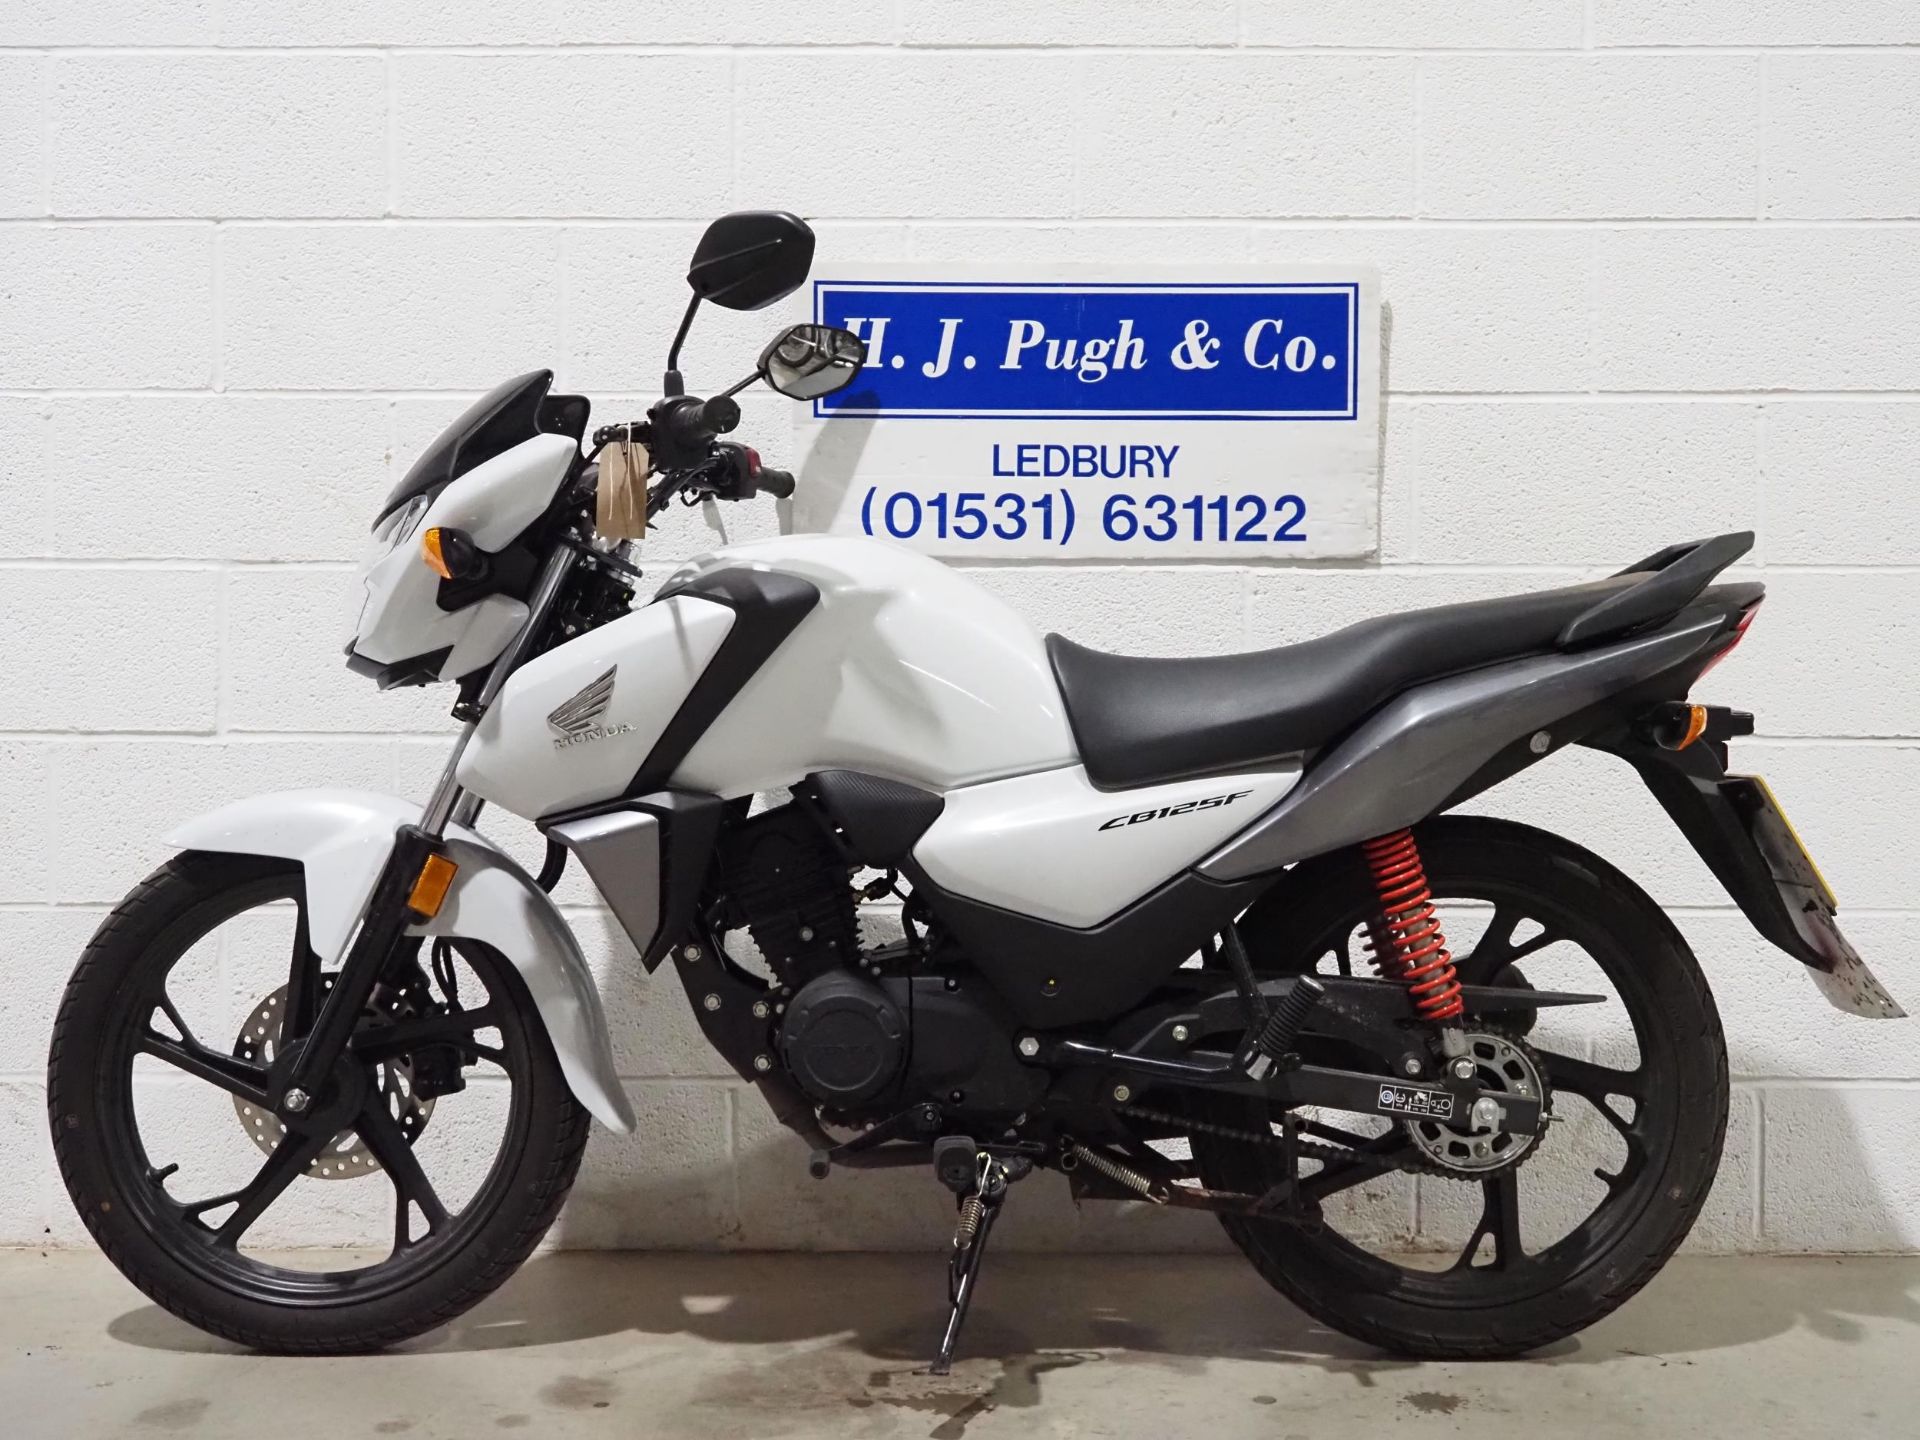 Honda CBF125 motorcycle. 2022. 124cc. Runs and rides. Recent service Comes with wheel lock, - Image 6 of 6